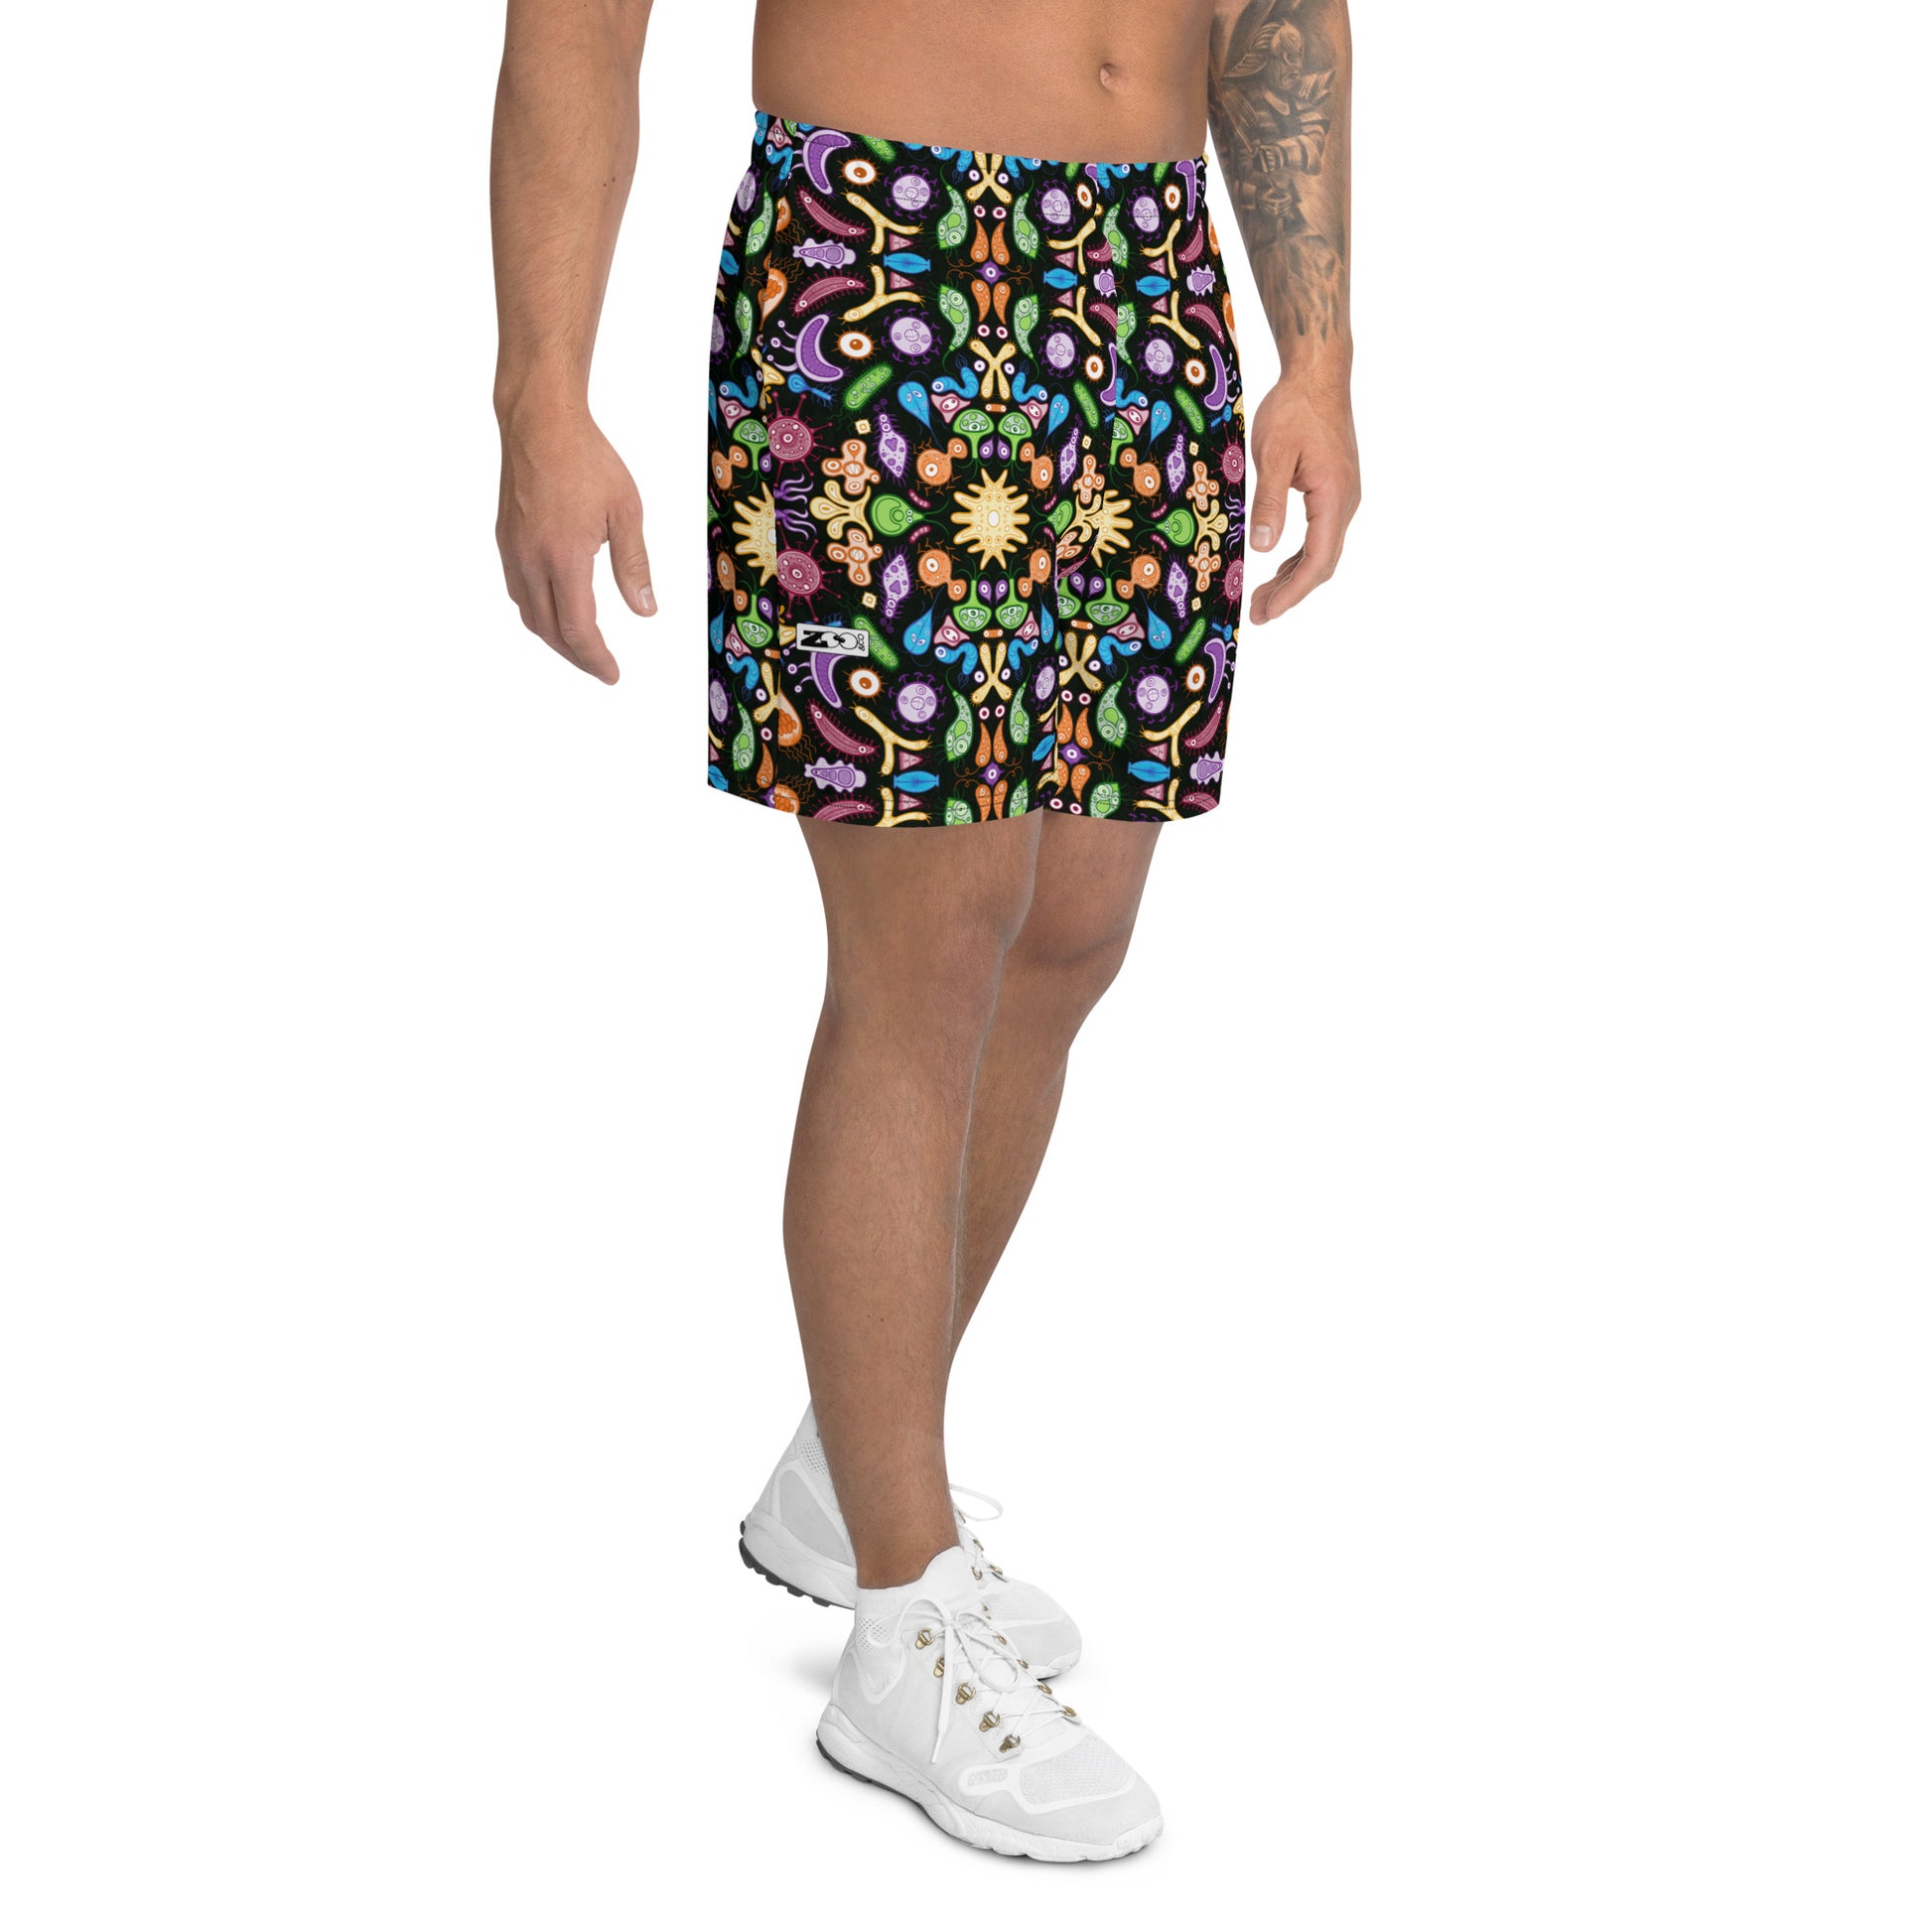 Don't be afraid of microorganisms Men's Athletic Long Shorts. Side view